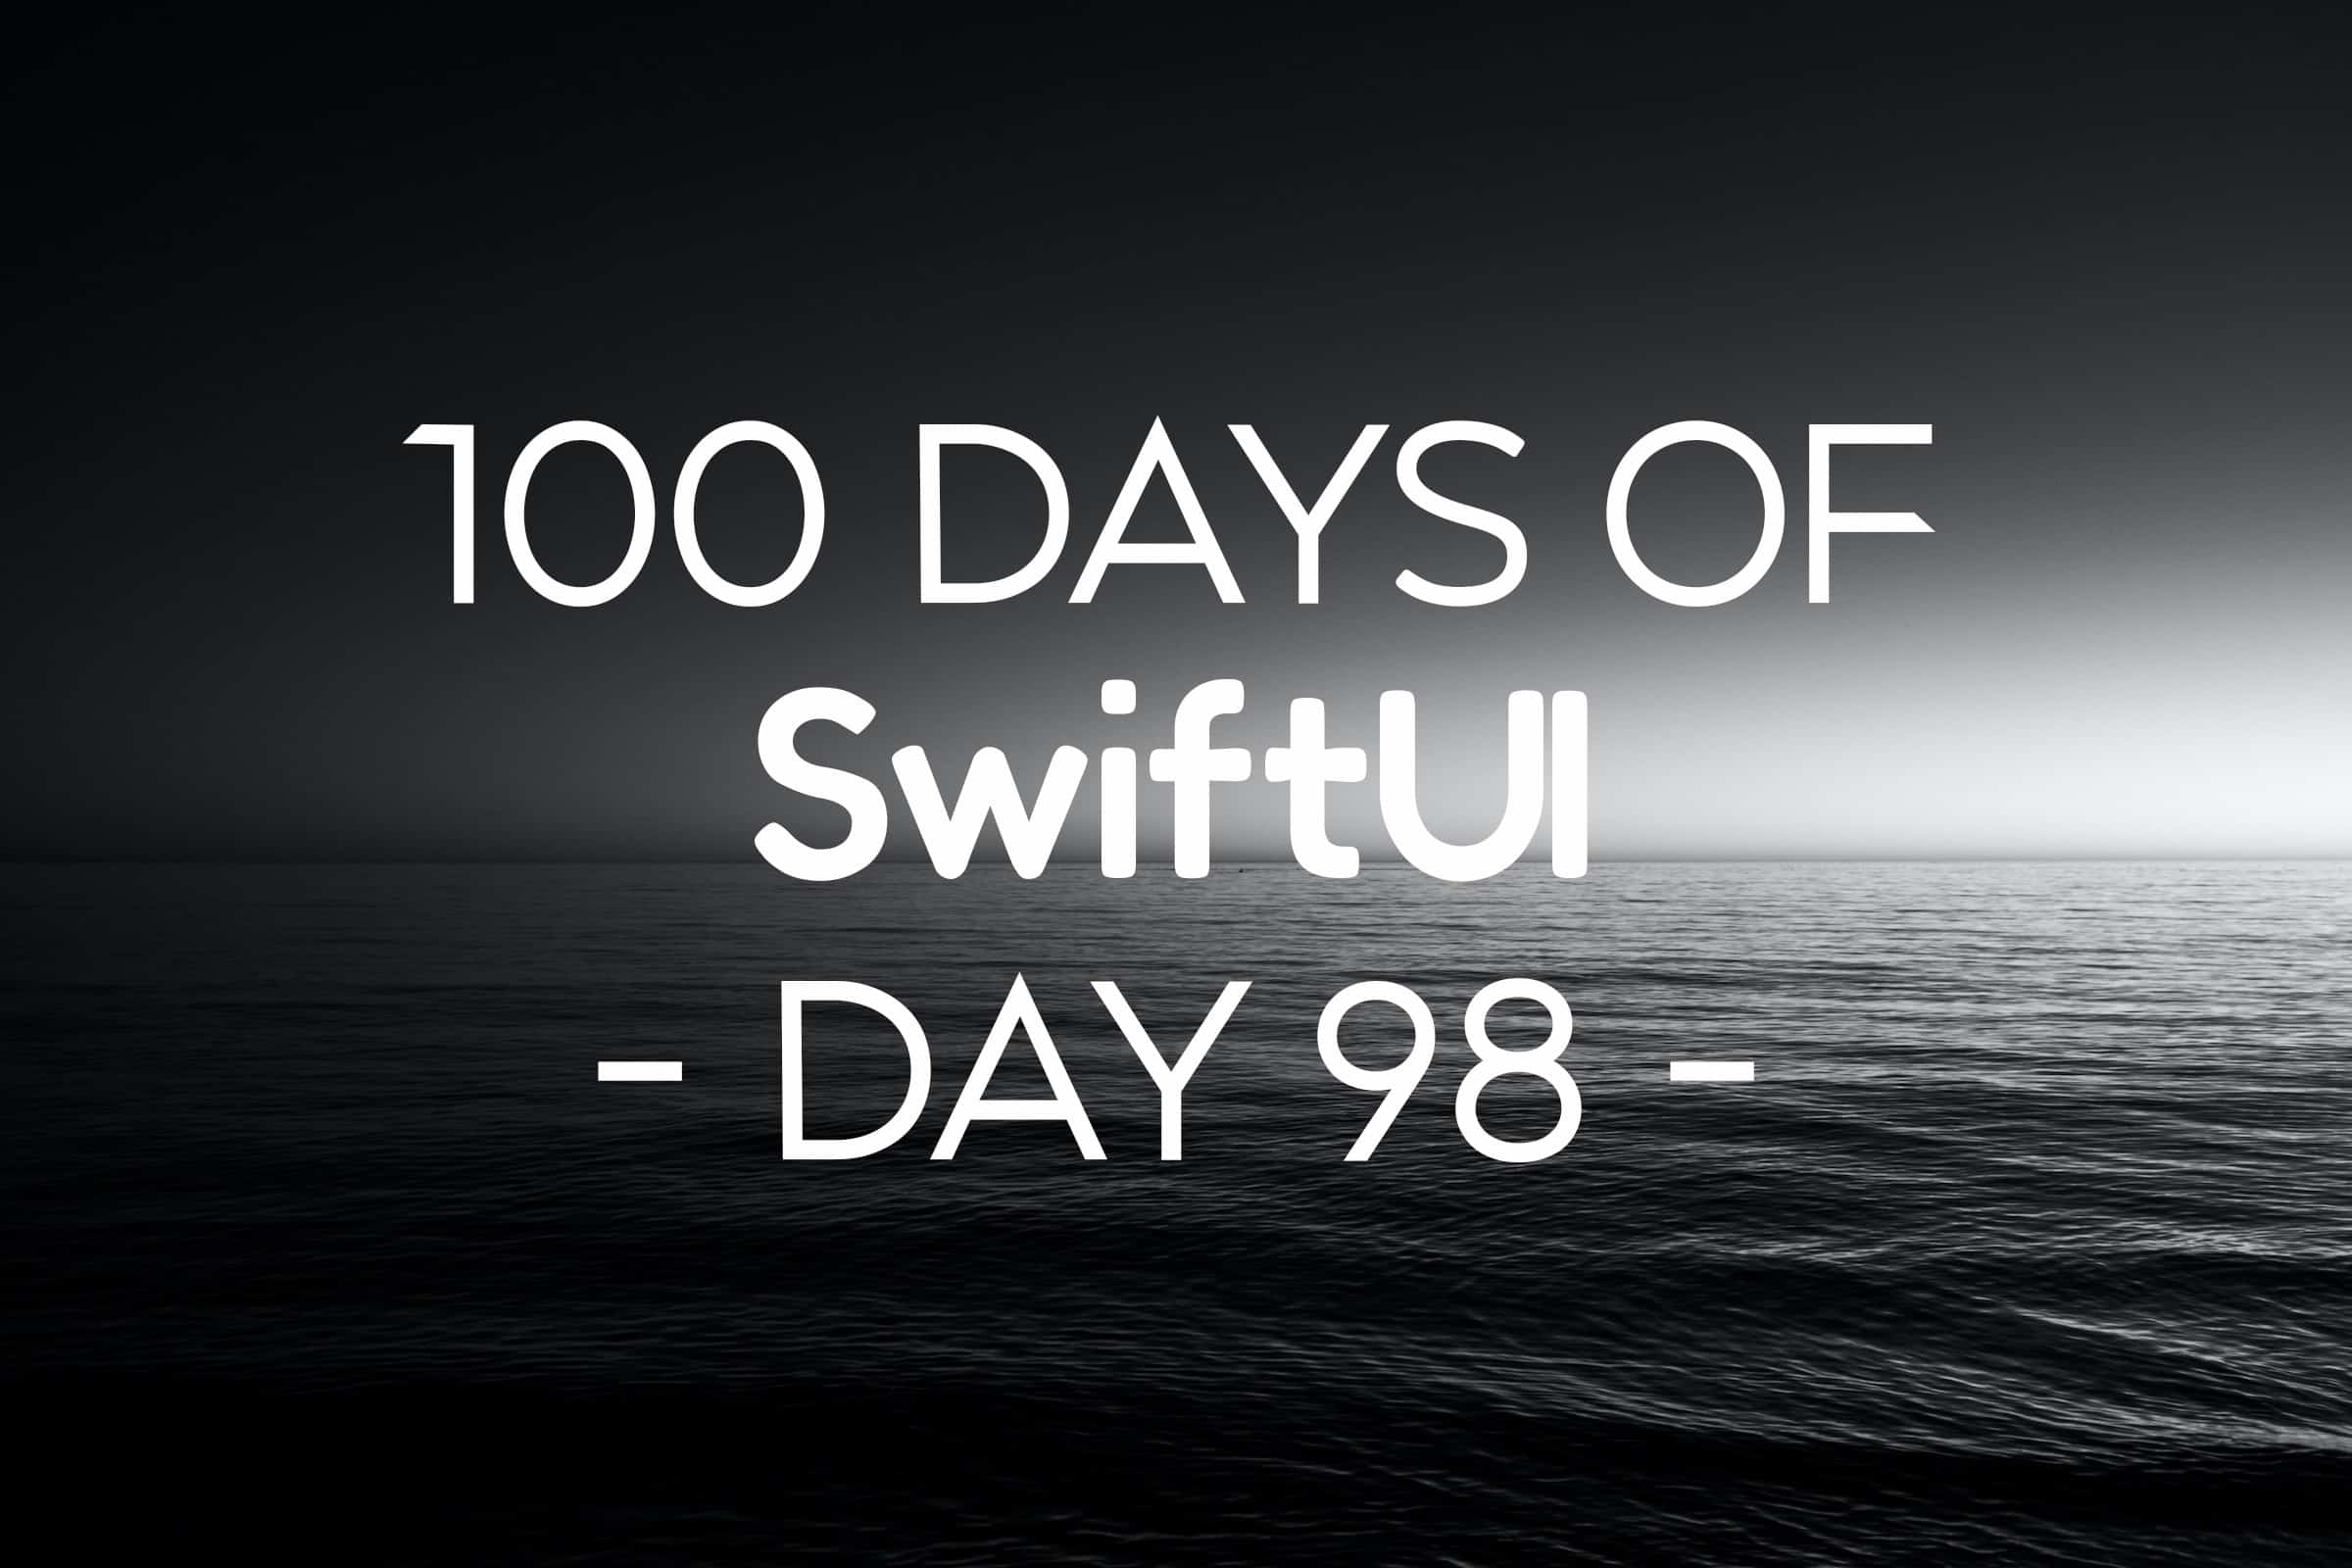 100 Days of SwiftUI Day 98